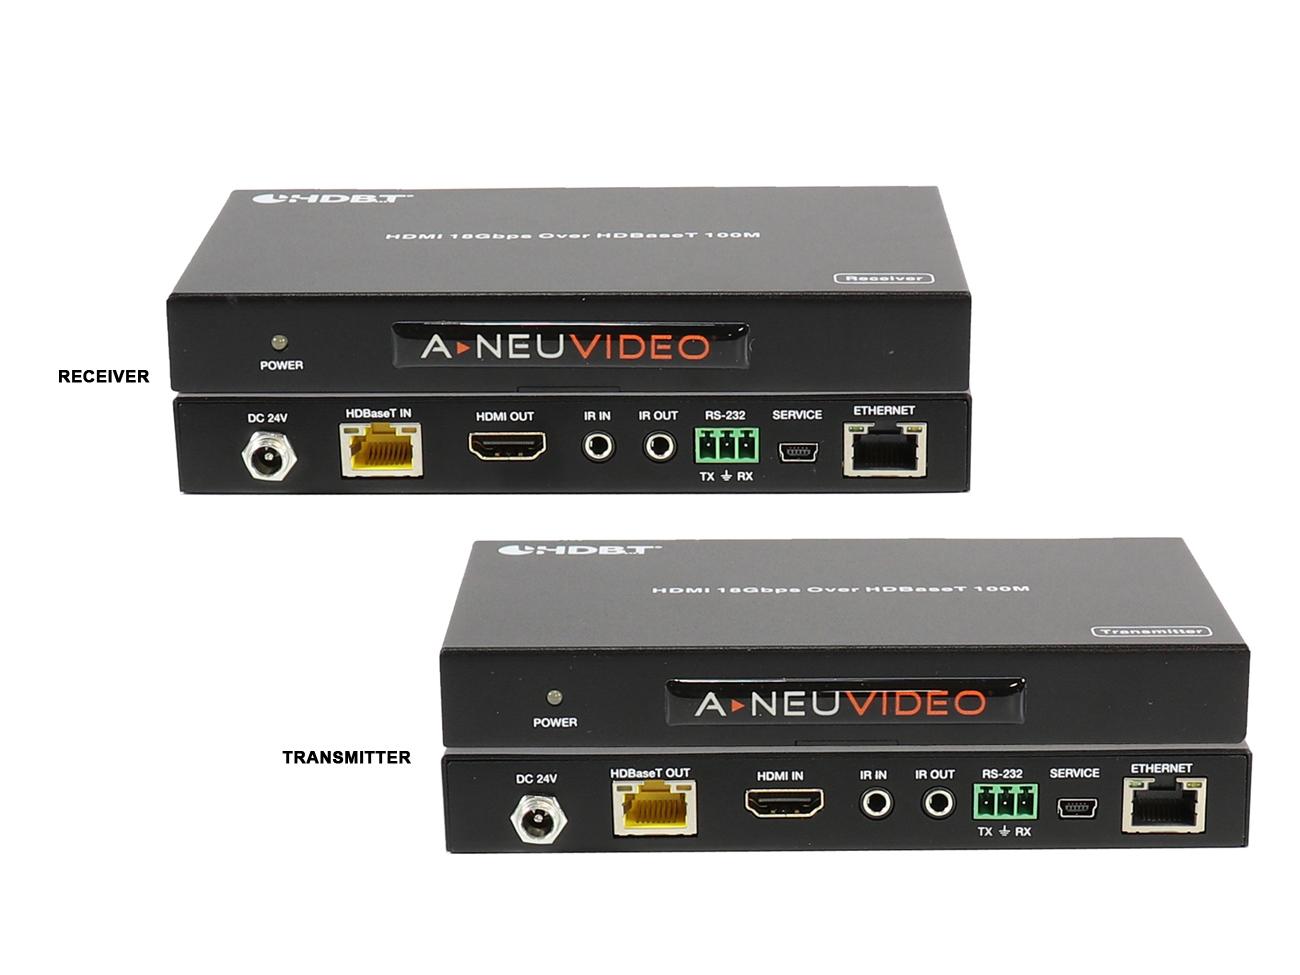 ANI-HDR100 HDMI 4K HDR 18Gbps PoH Extender (Transmitter/Receiver) Kit over CAT5e/6 328ft/100M by A-NeuVideo